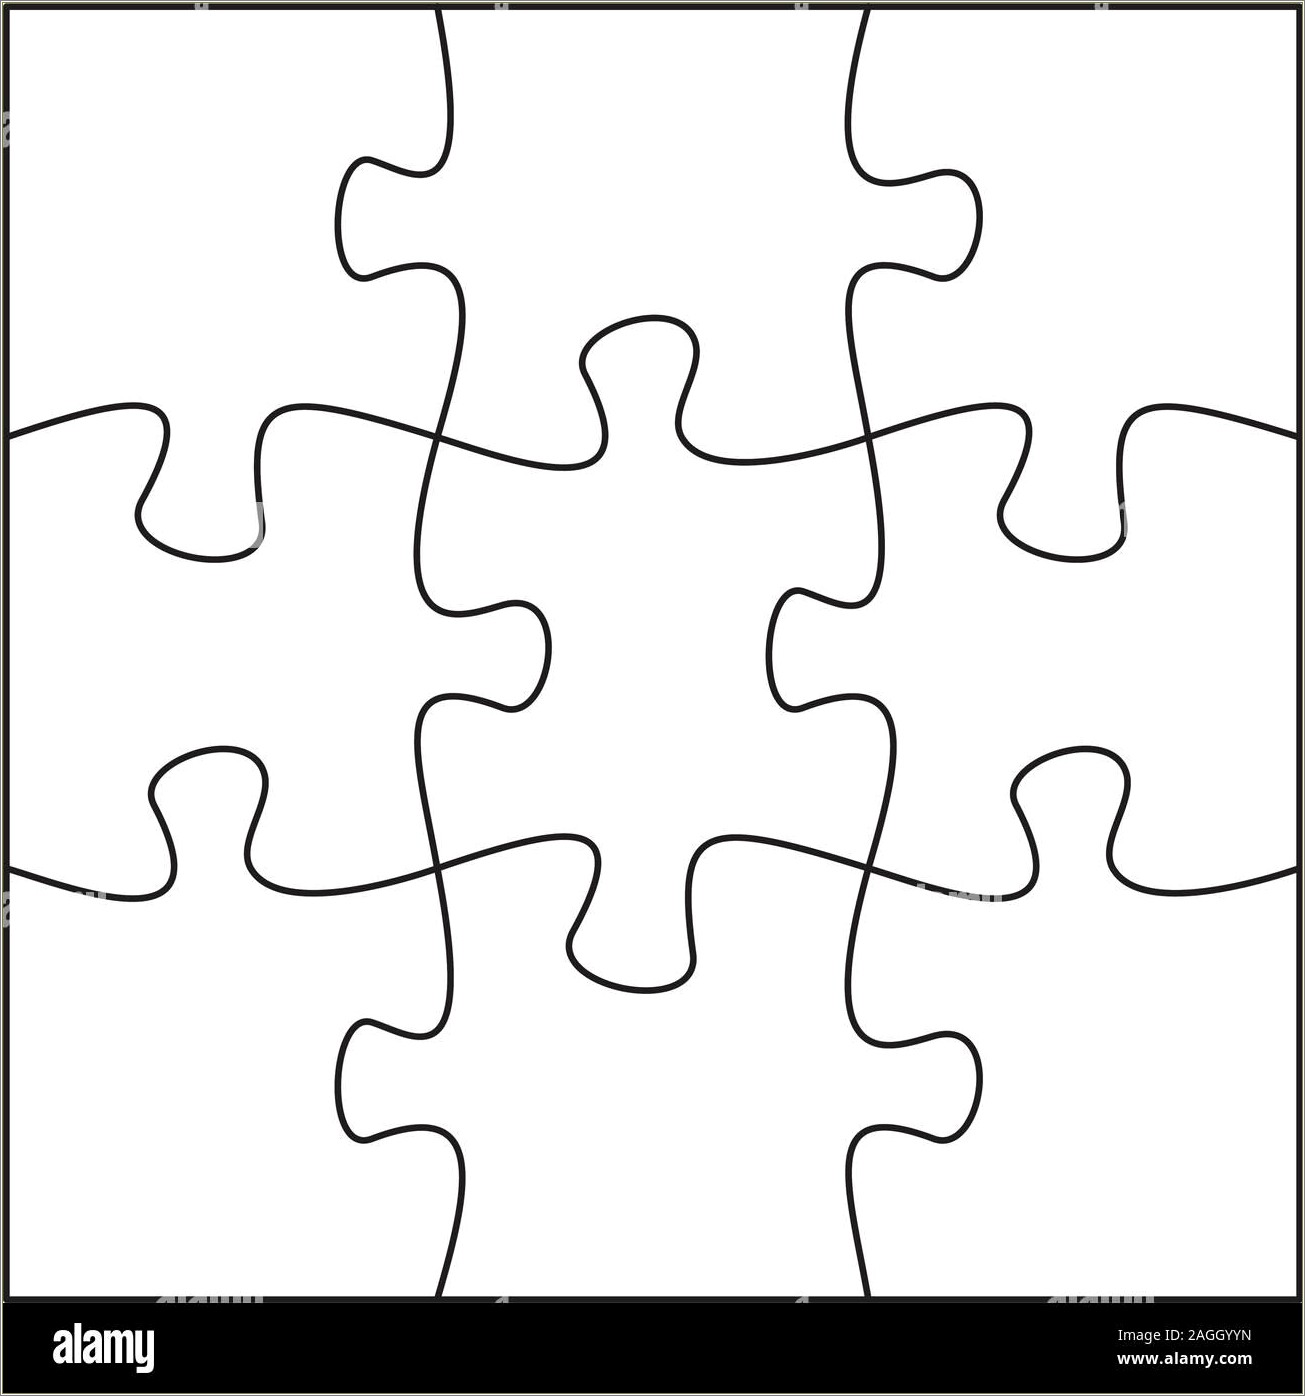 Free Blank 9 Piece Jigsaw Puzzle Template